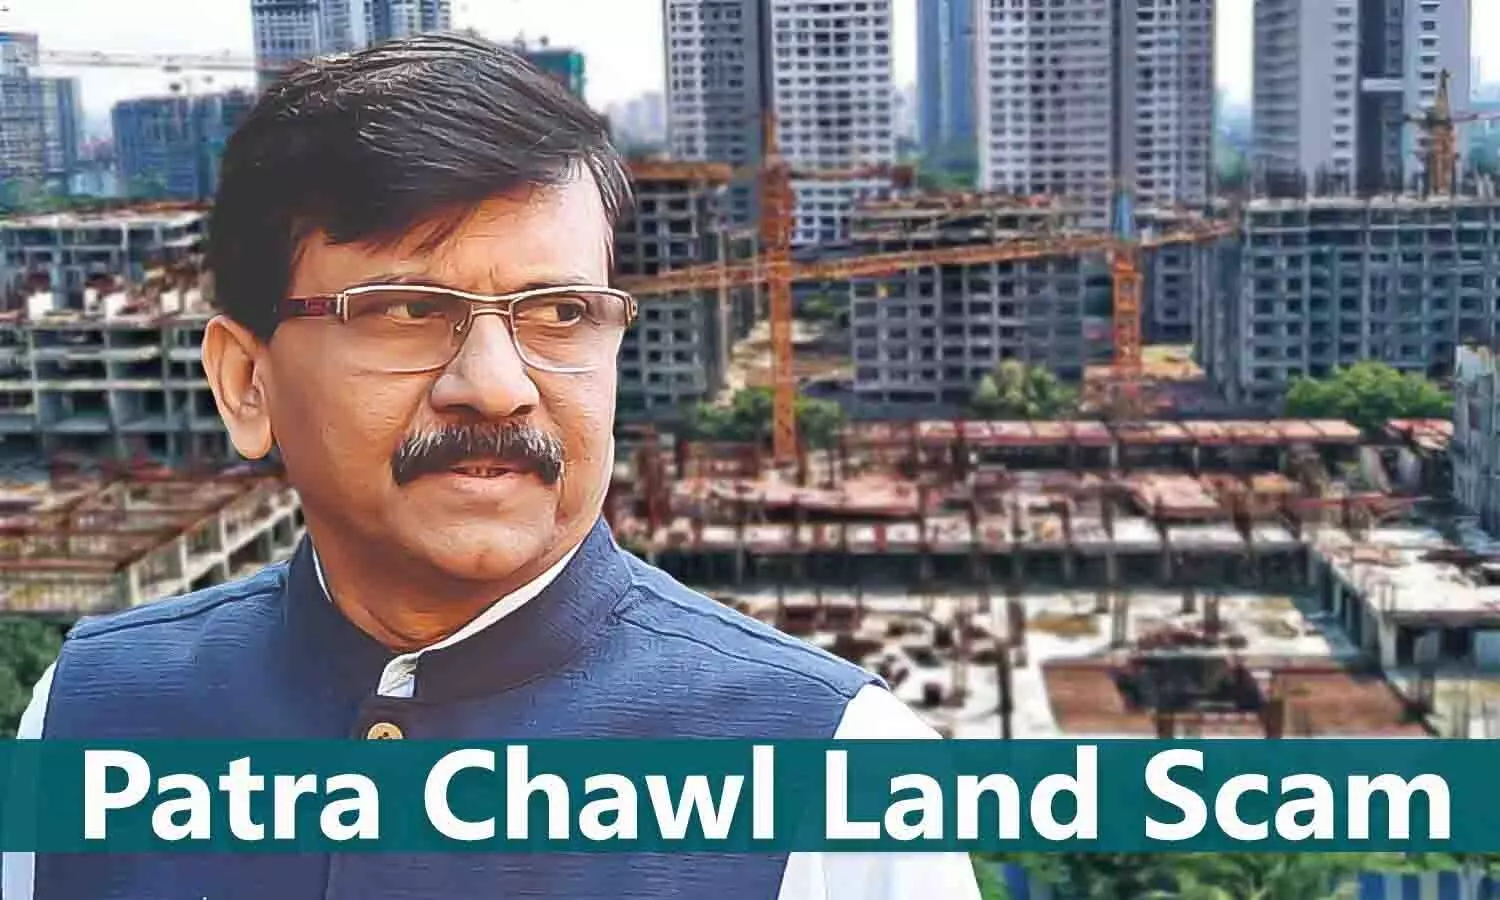 What is Patra Chawl Land Scam